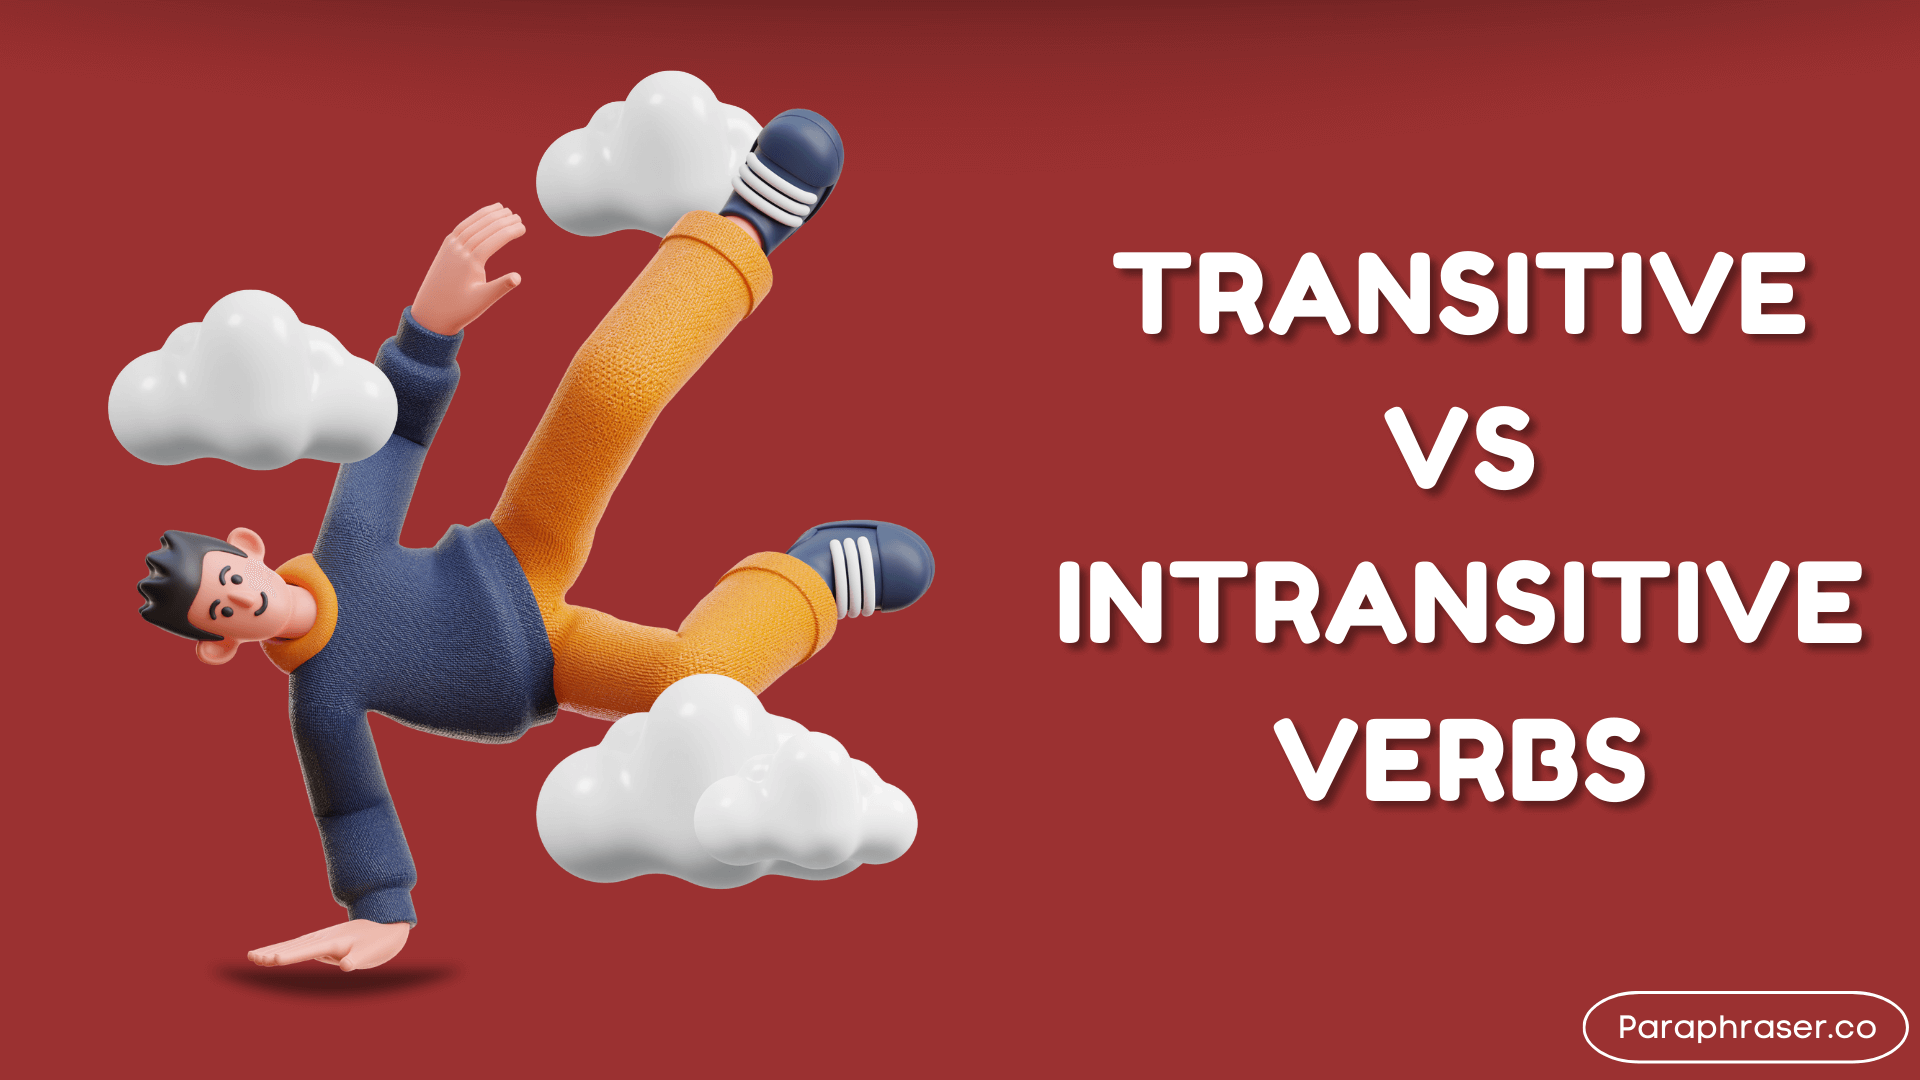 What are Transitive and Intransitive Verbs?